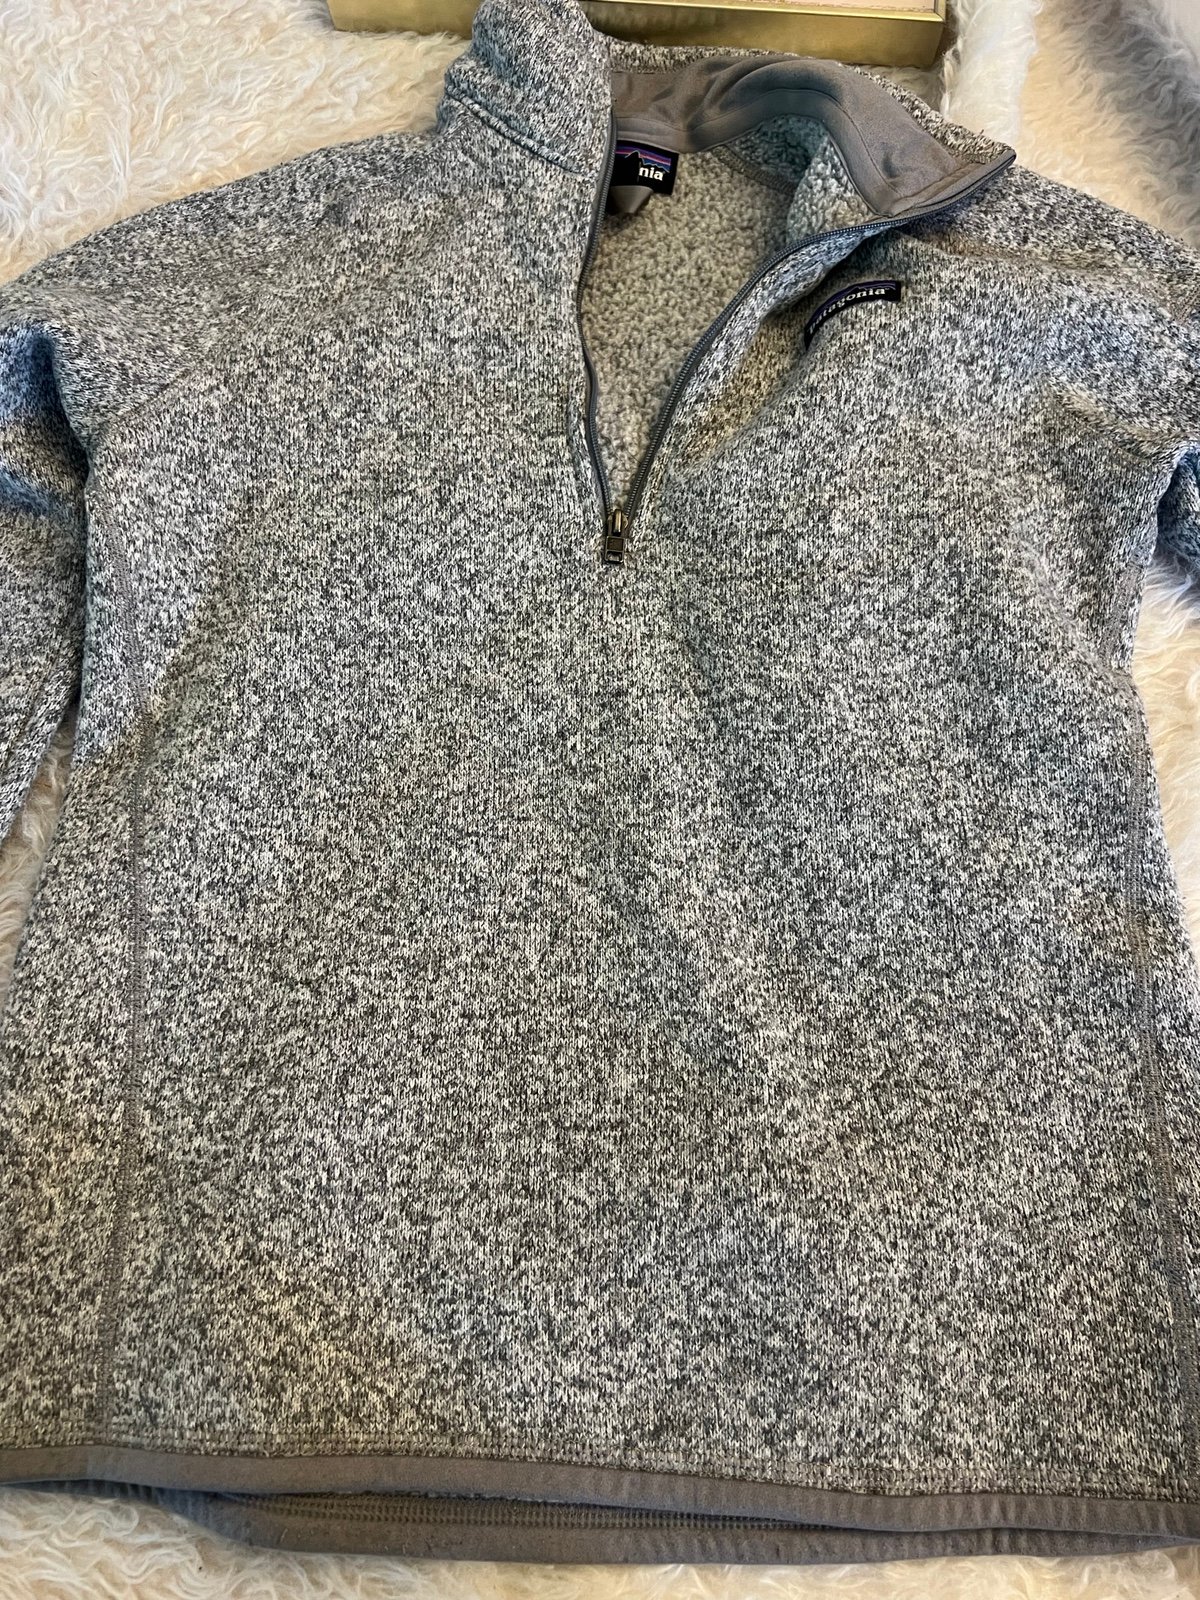 Stylish Patagonia Better sweater  Size M  Flawless condition  Measurements in photos m243yuUwG Online Shop